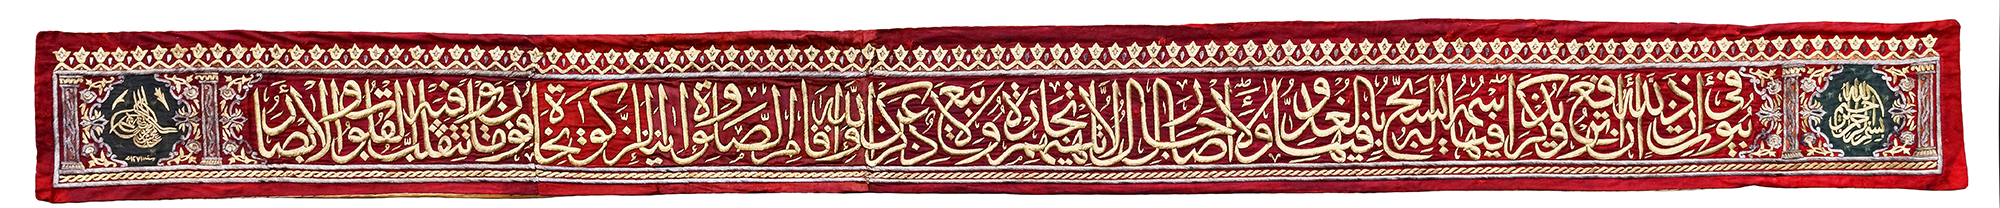 AN OTTOMAN METAL THREAD CALLIGRAPHIC BAND ( HIZAM) FOR THE TOMB OF THE PROPHET IN MEDINA, DATED 127 - Image 2 of 2